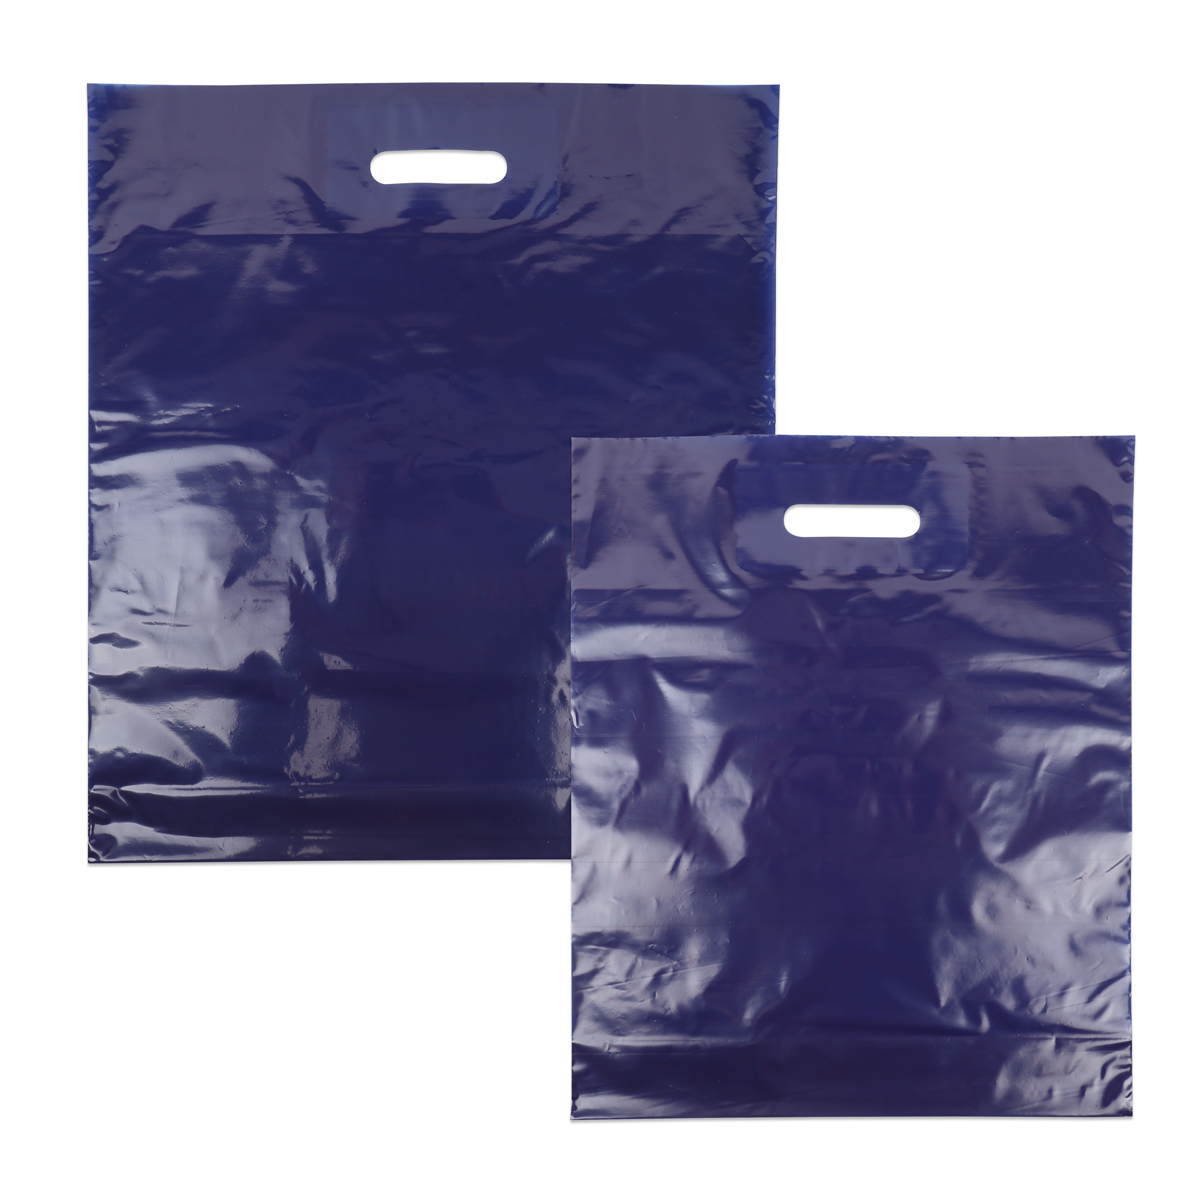 Budget plastic bags - Solid colours